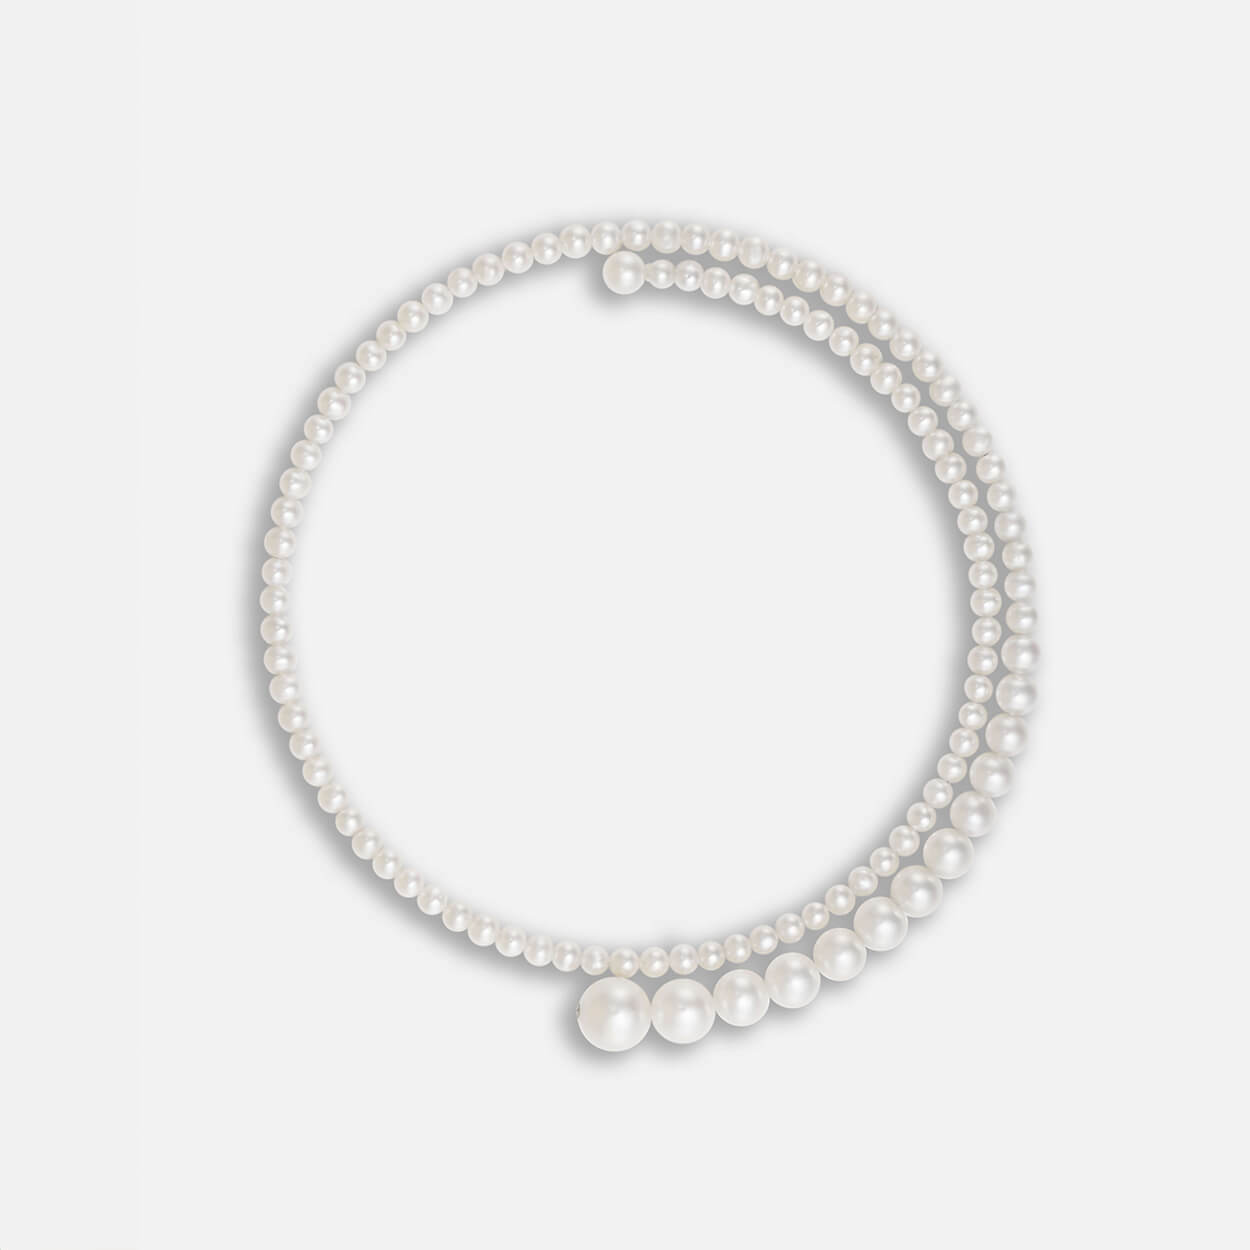 spiral necklace using white fresh water pearls, using 14K white gold.